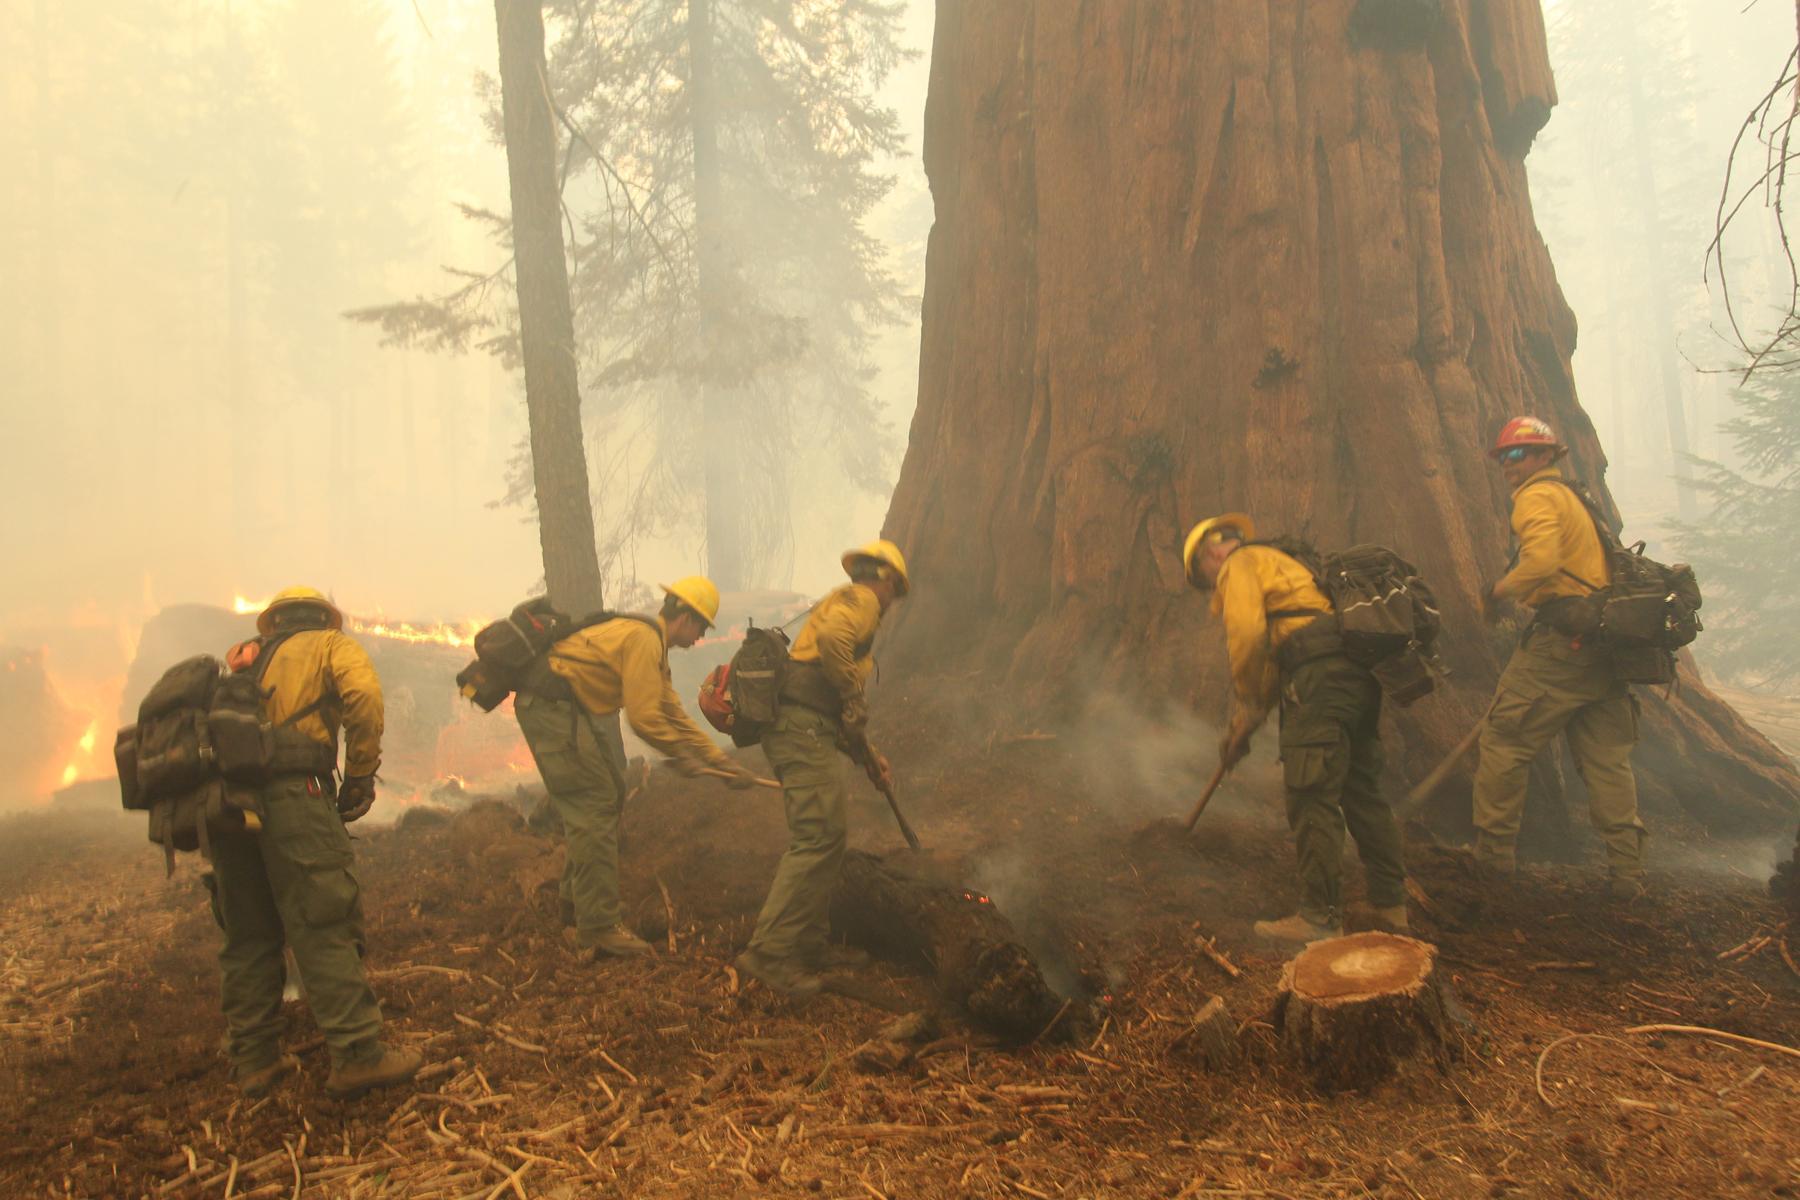 Firefighters Scrape Duff Around Giant Sequoia. Photo: Mike McMillan - BIA